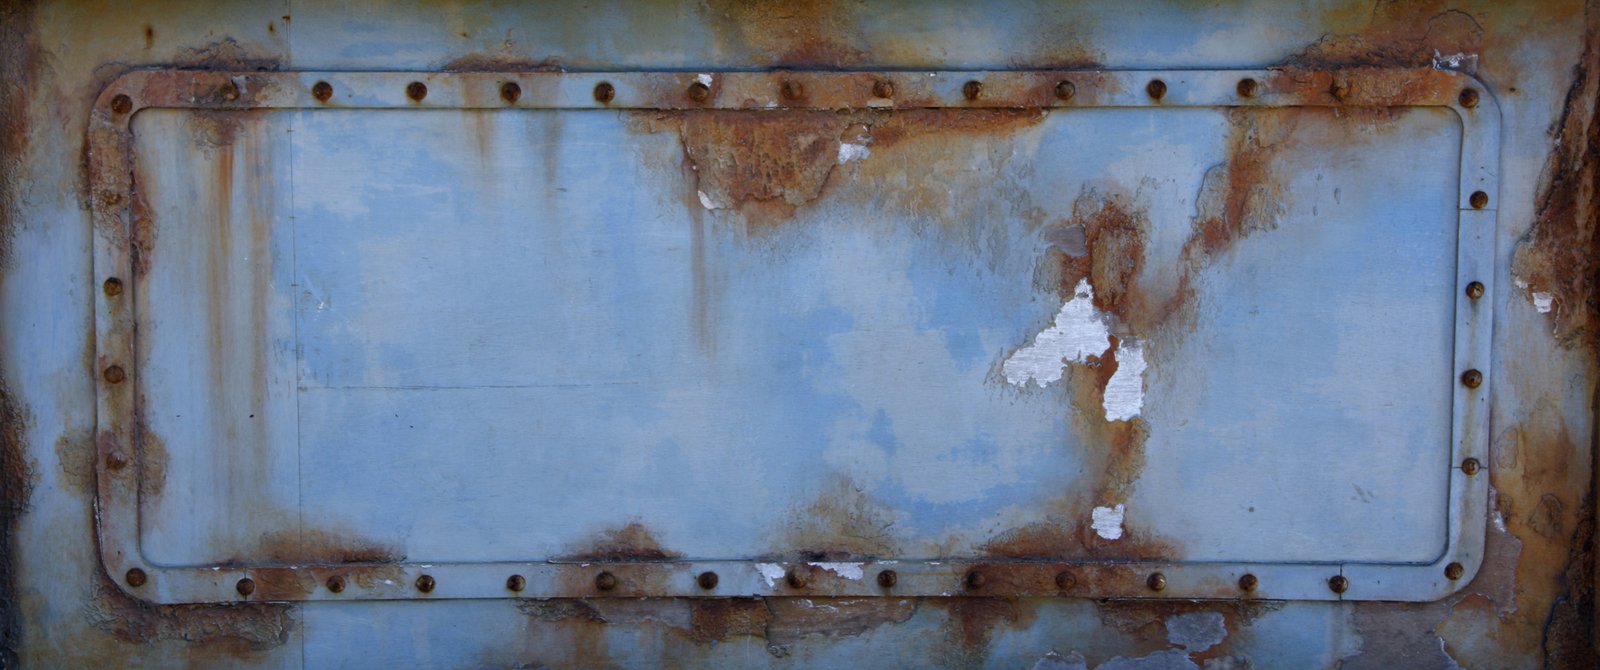 the rusted metal panel has lots of rust on it